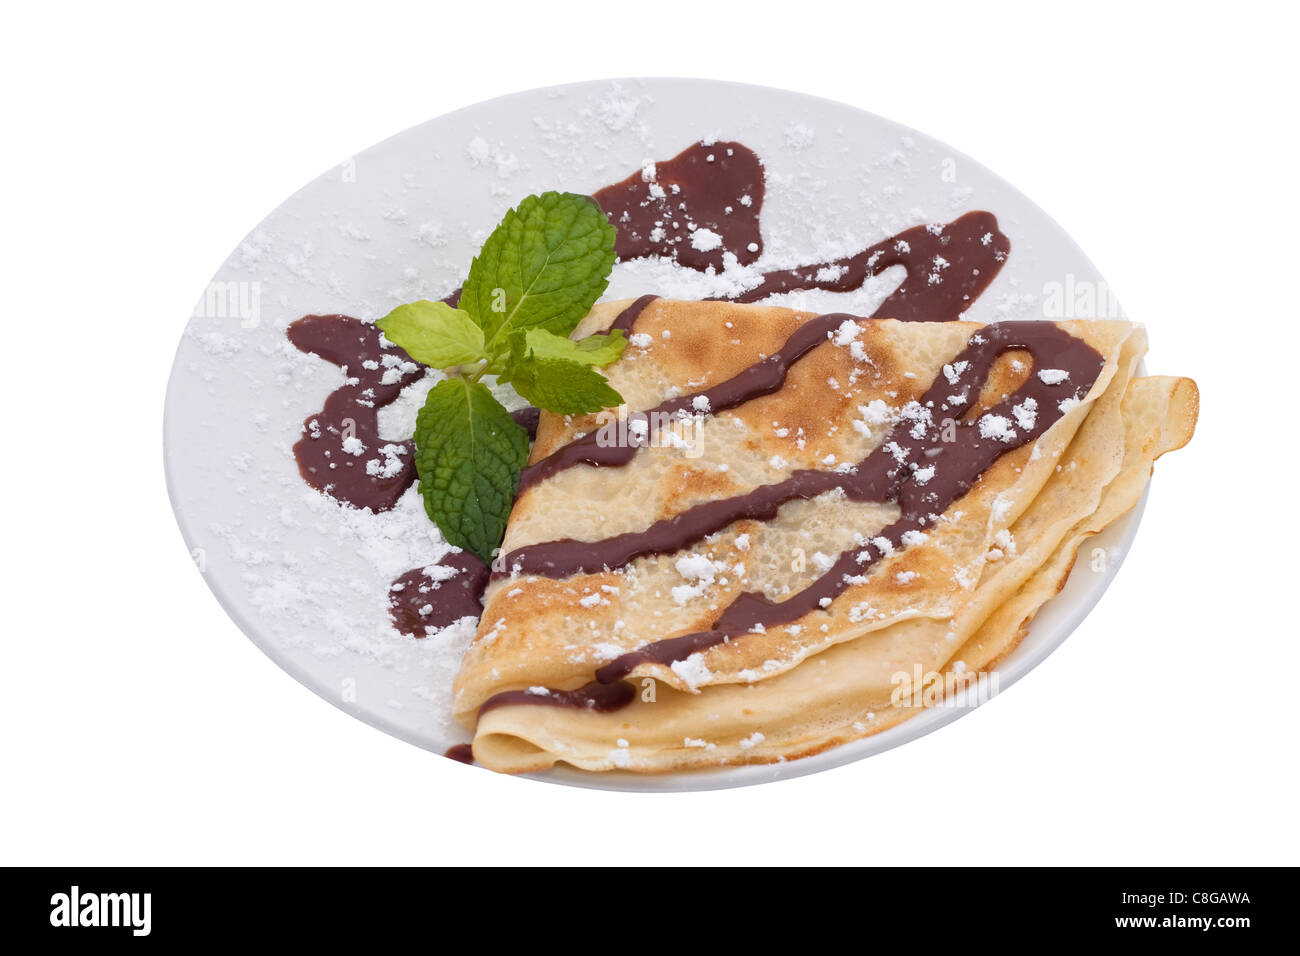 Crepe with chocolate, isolated on white background. Stock Photo